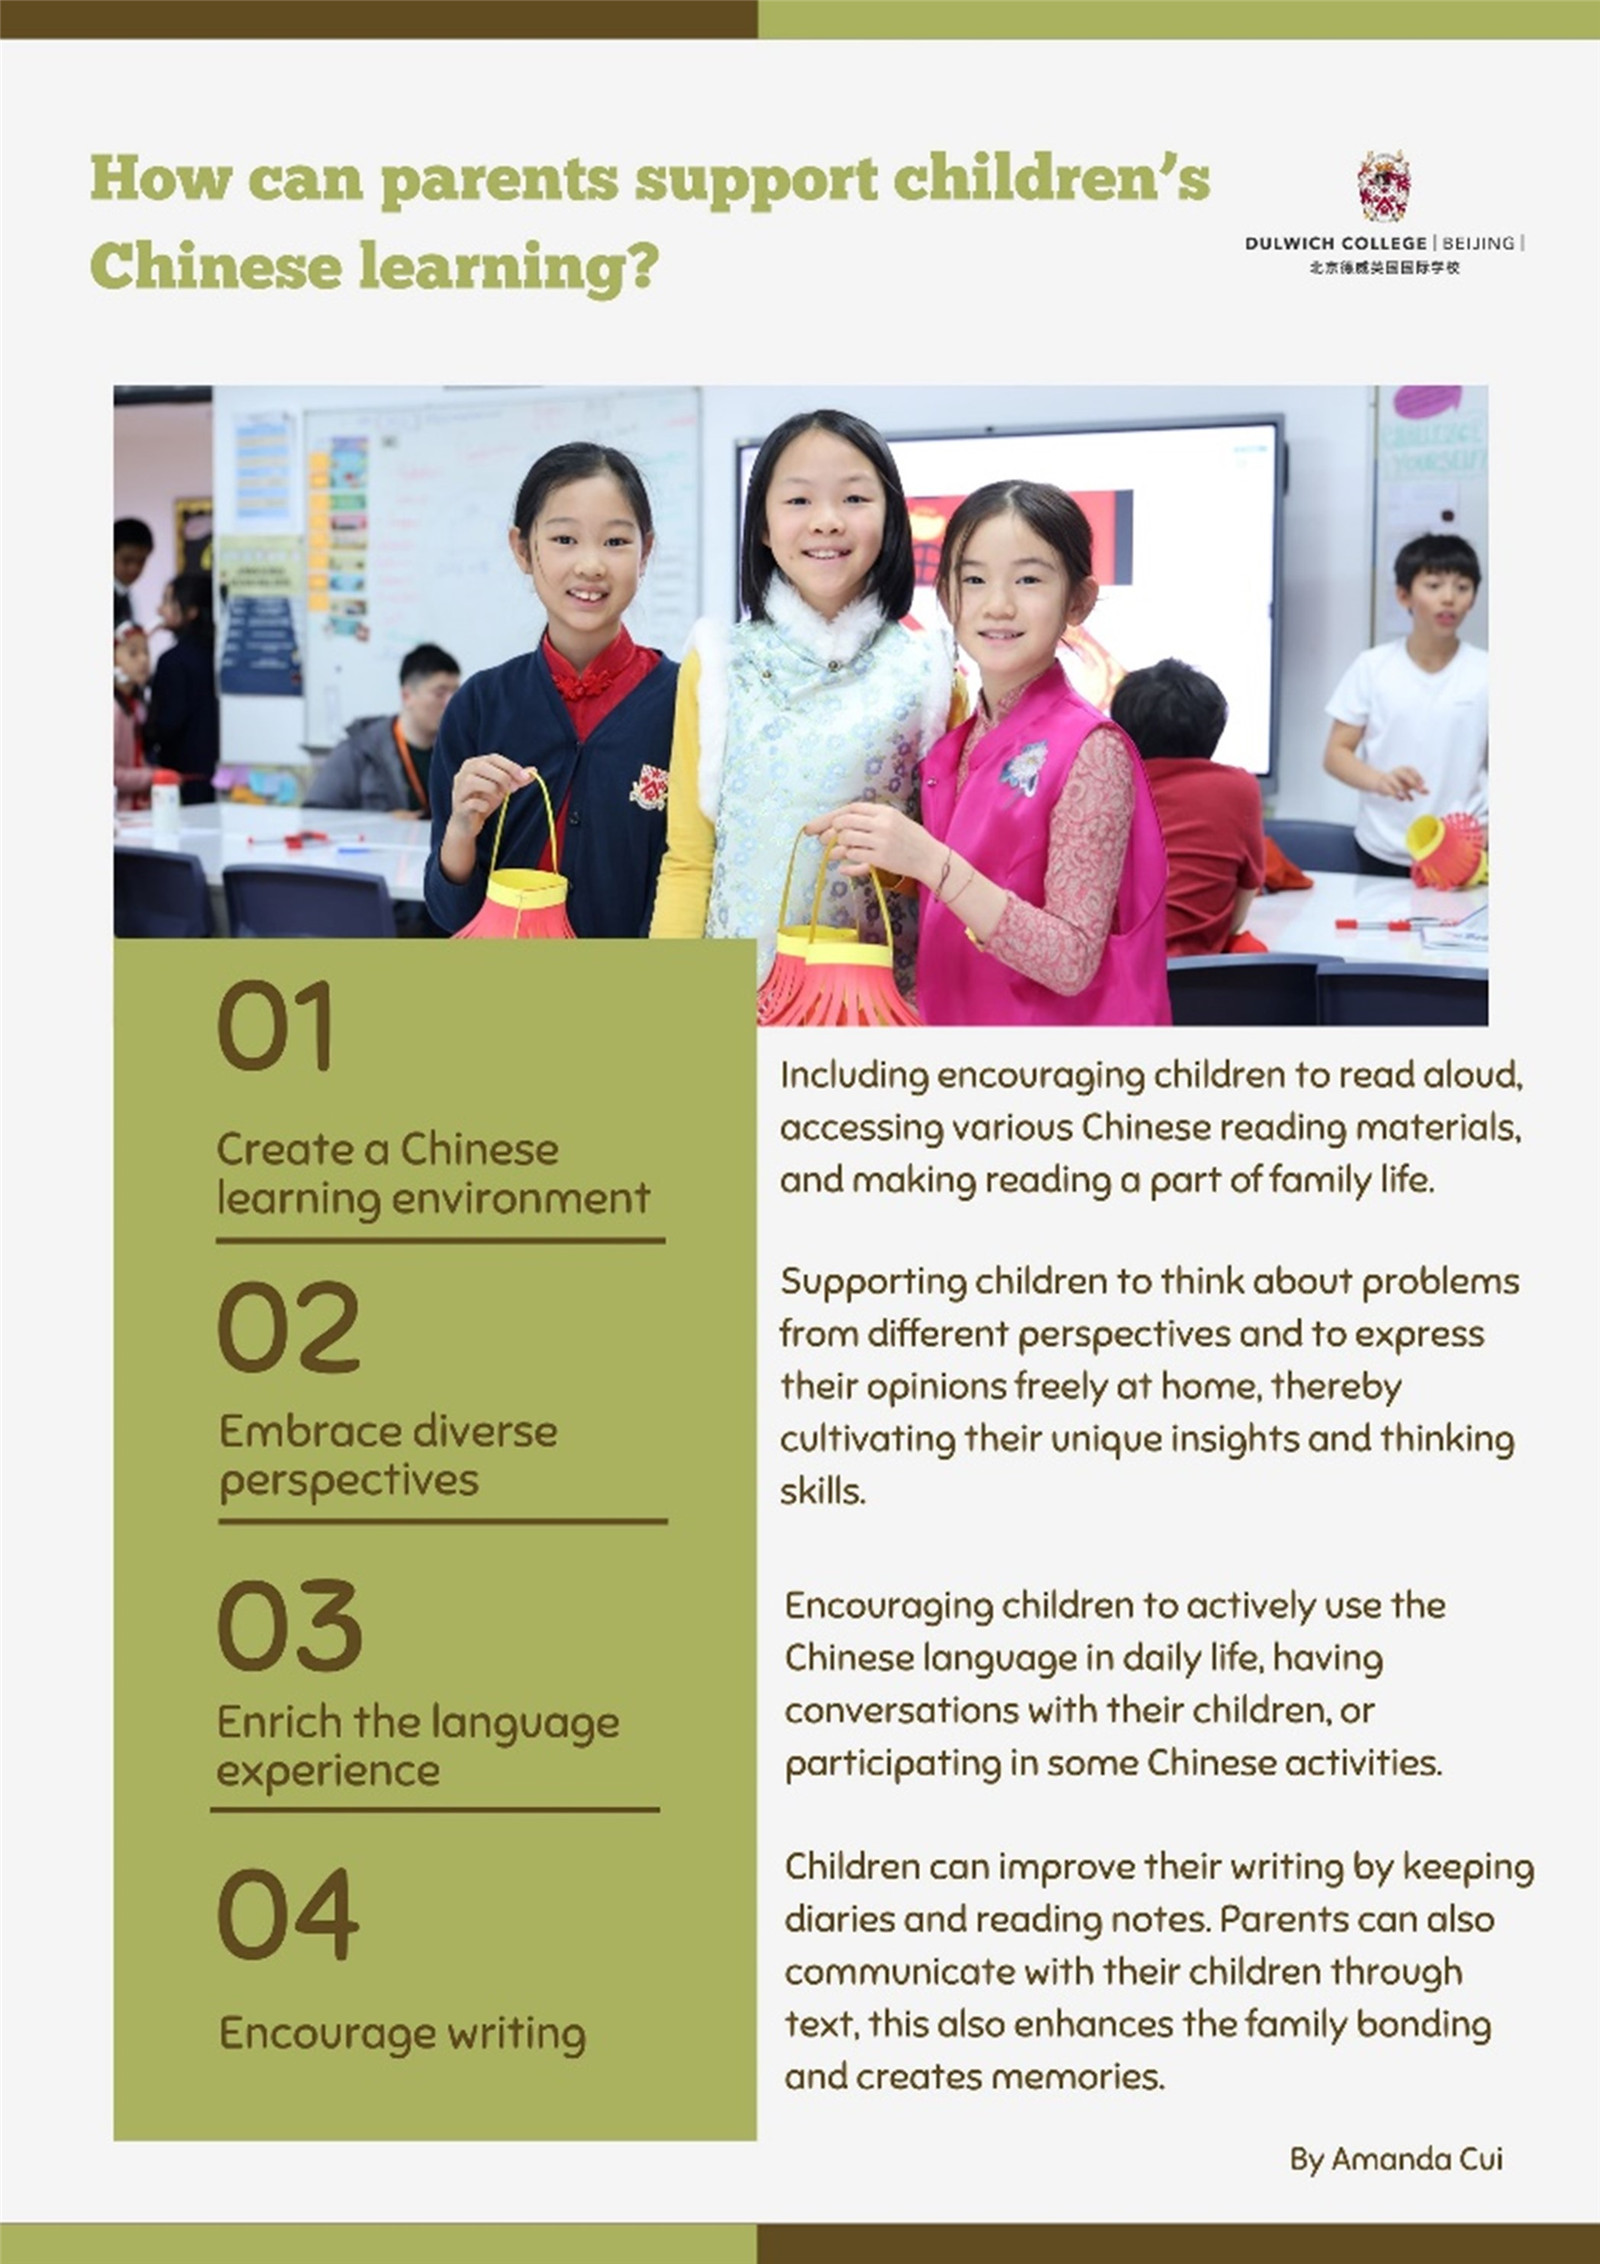 How can parents support children's Chinese learning